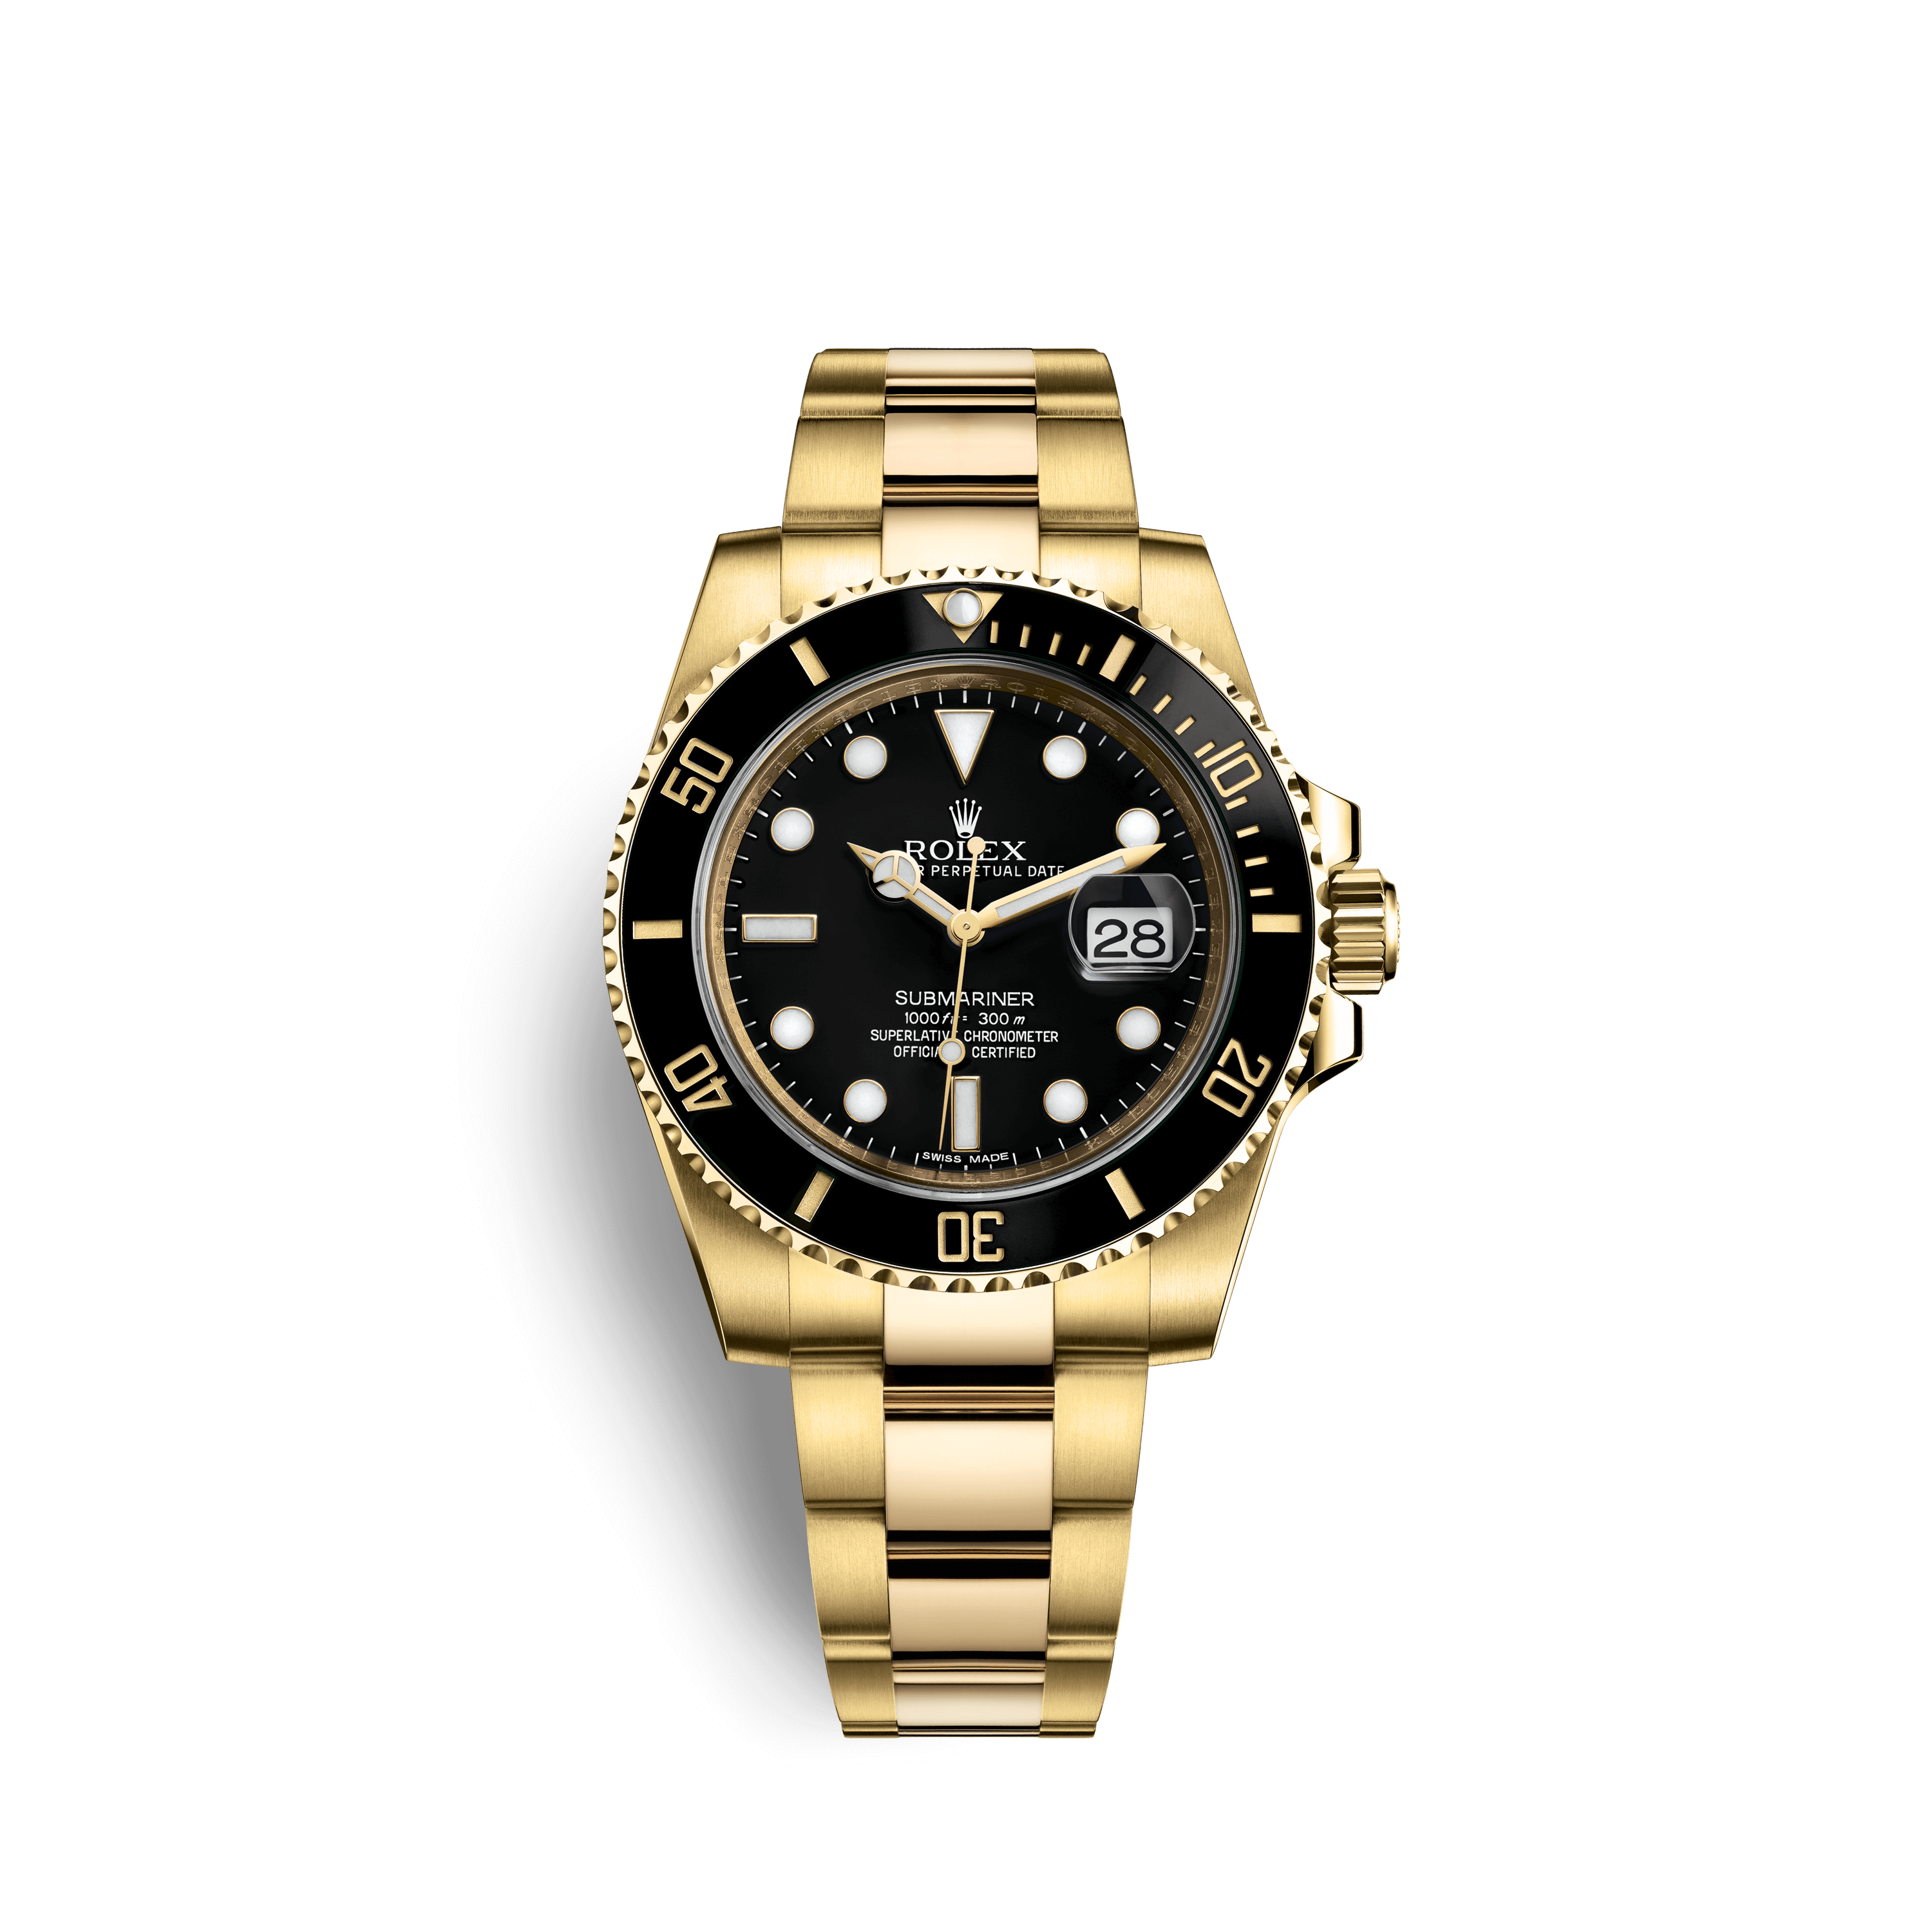 Submariner Watch Rolex Gold Colored Free Transparent Image HD Clipart